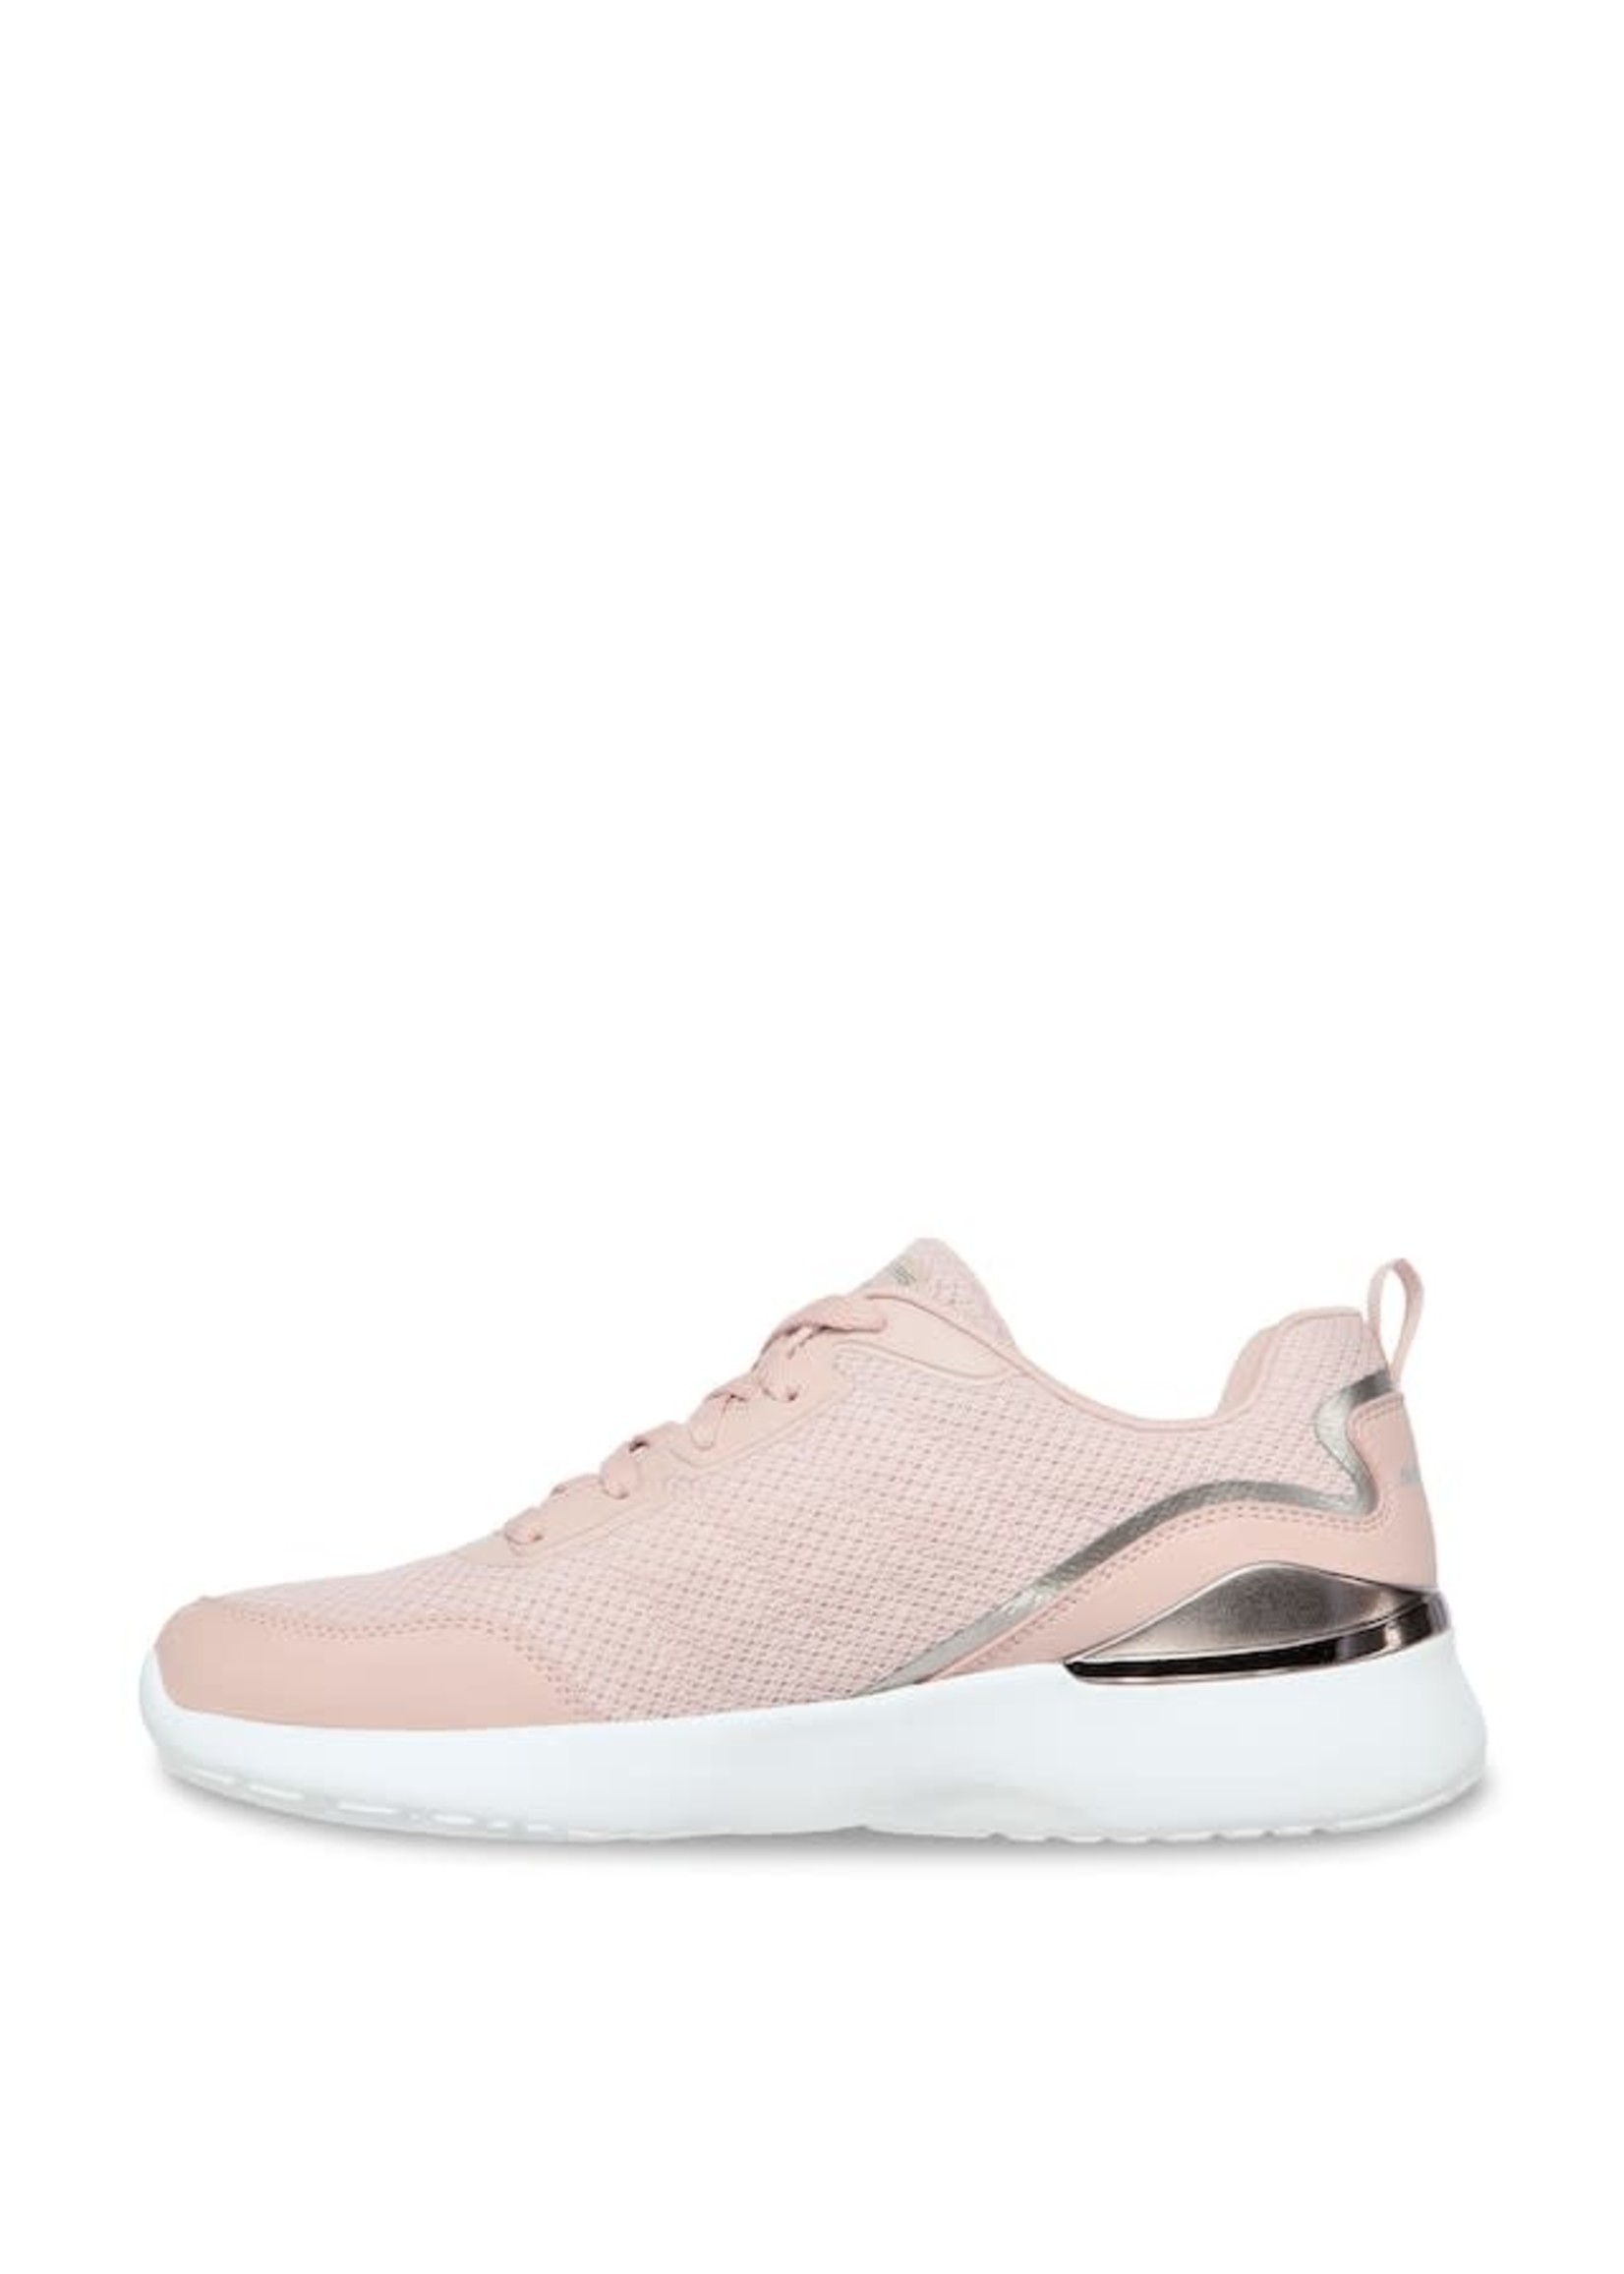 Skechers Womens Sketch-Air Dynamight The Halcyon 149660 Rose Pink ...